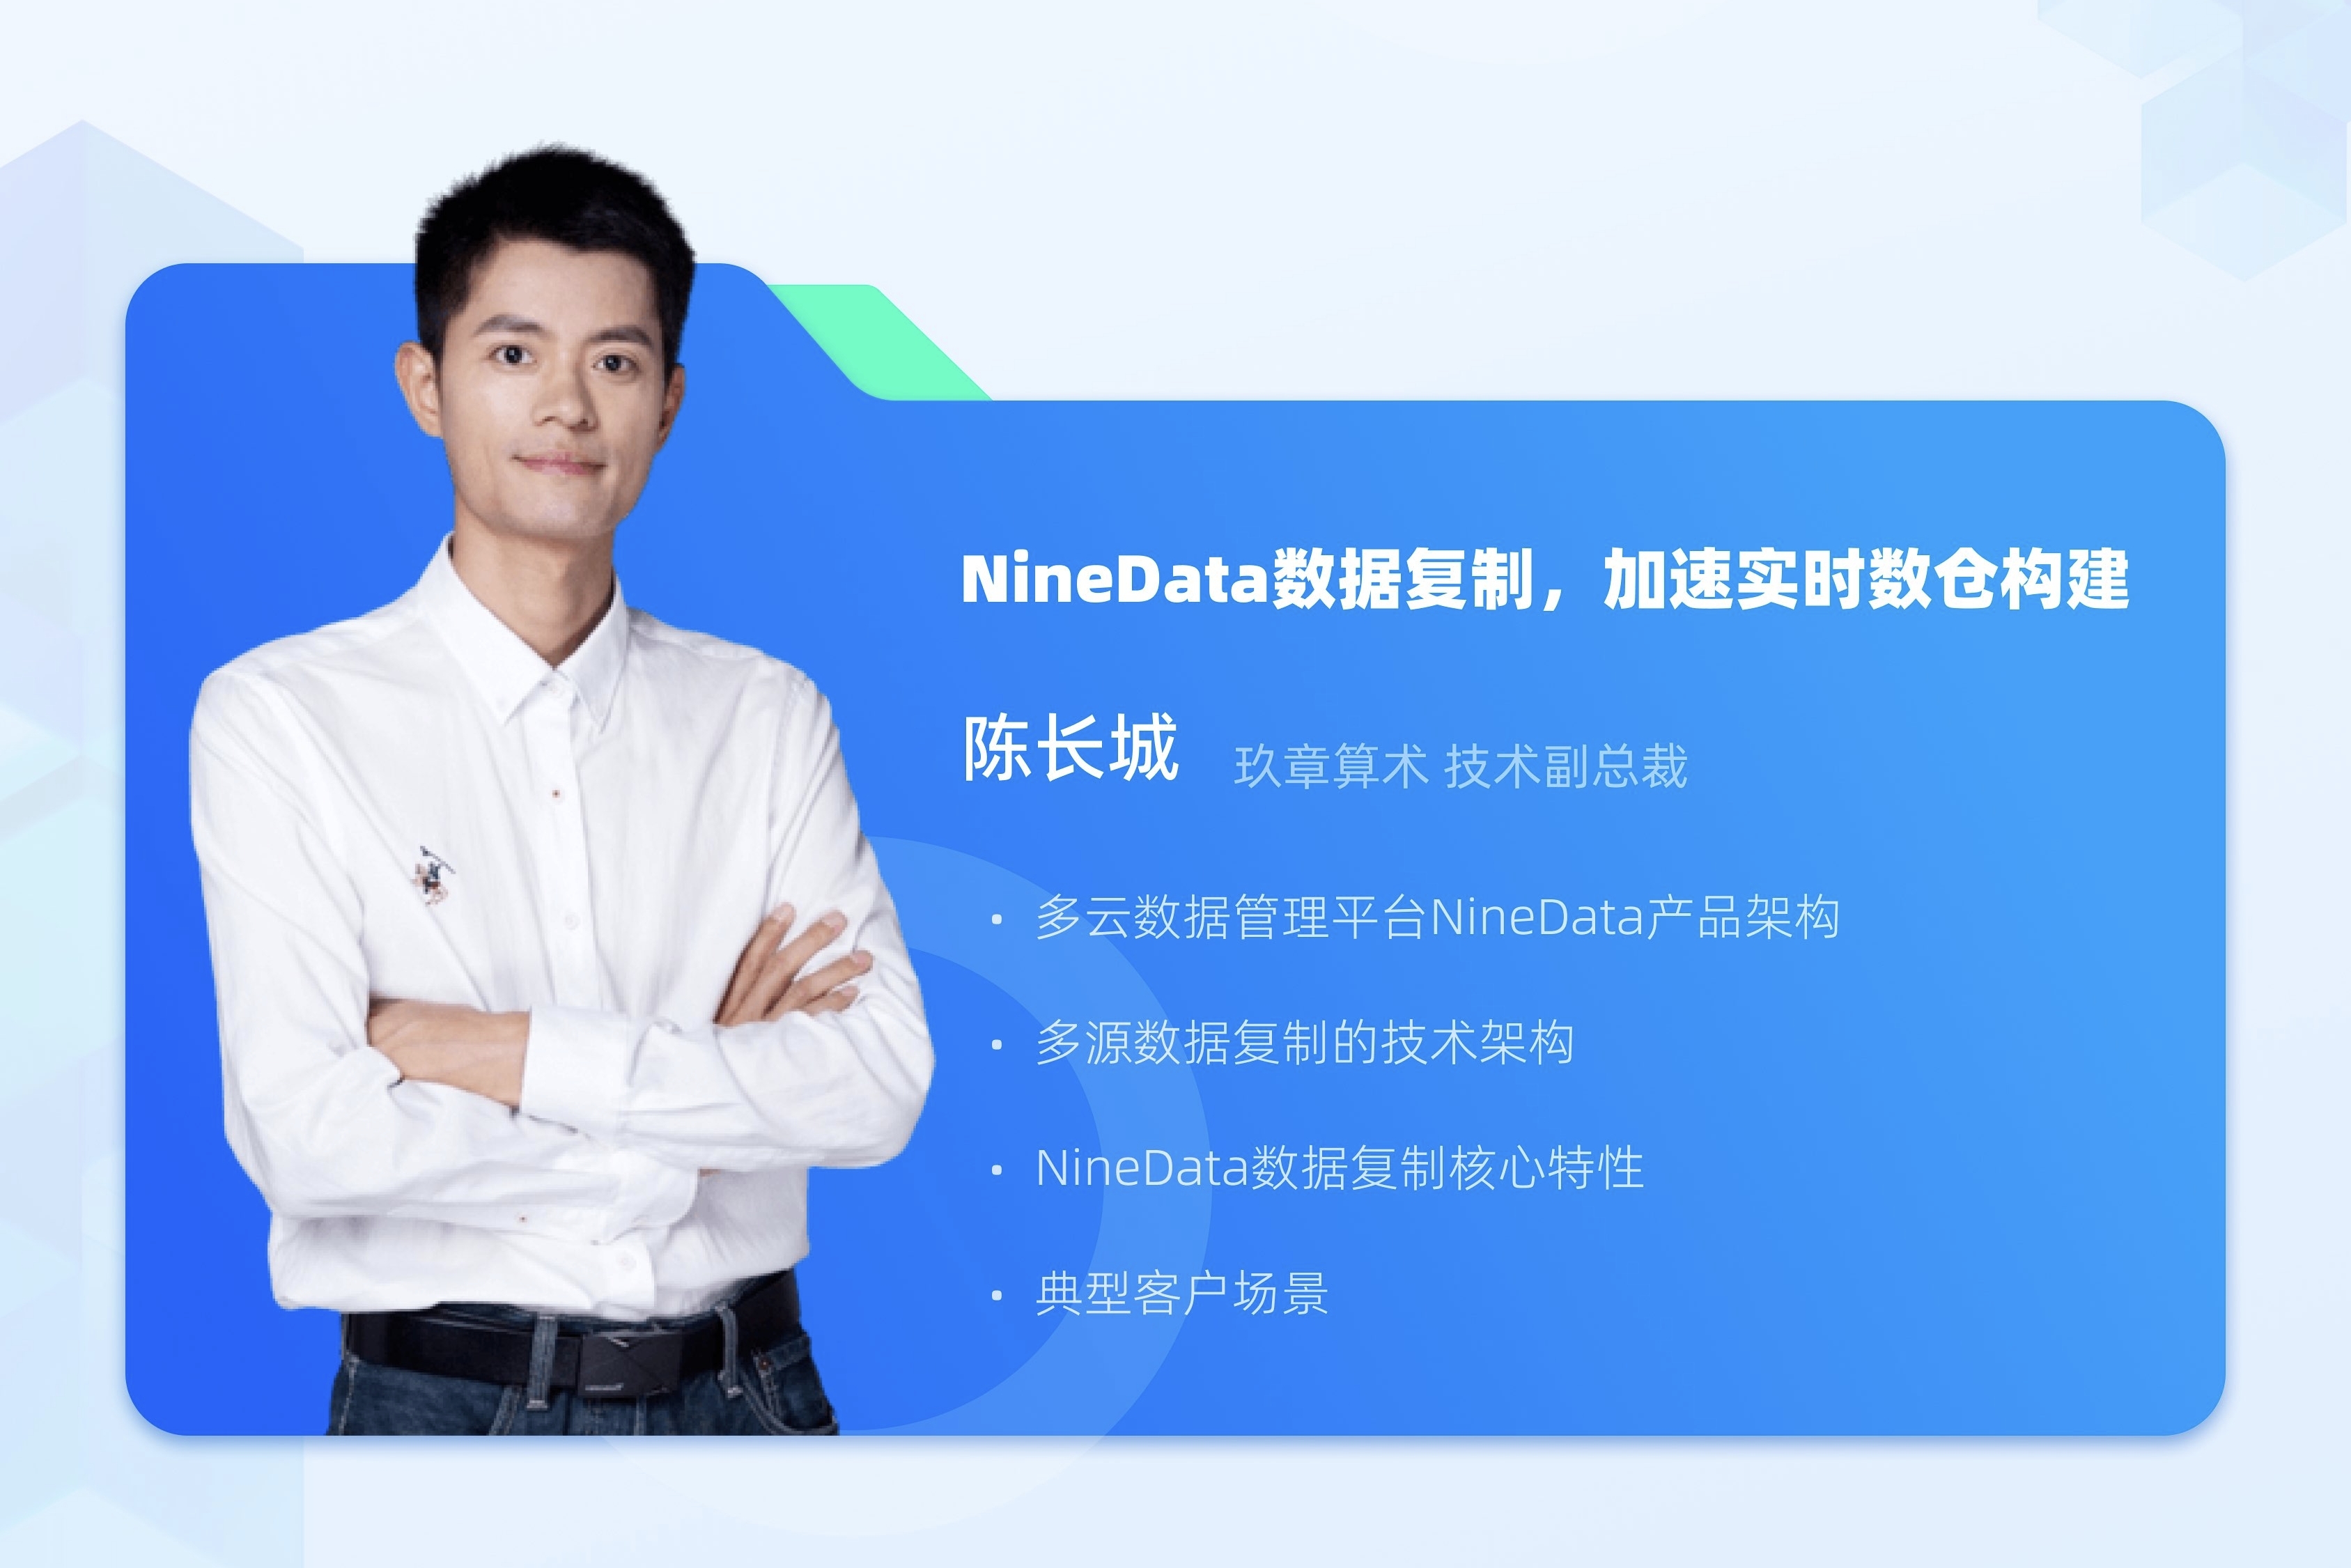 Technology sharing｜NineData data replication, accelerating the construction of real-time data warehouse